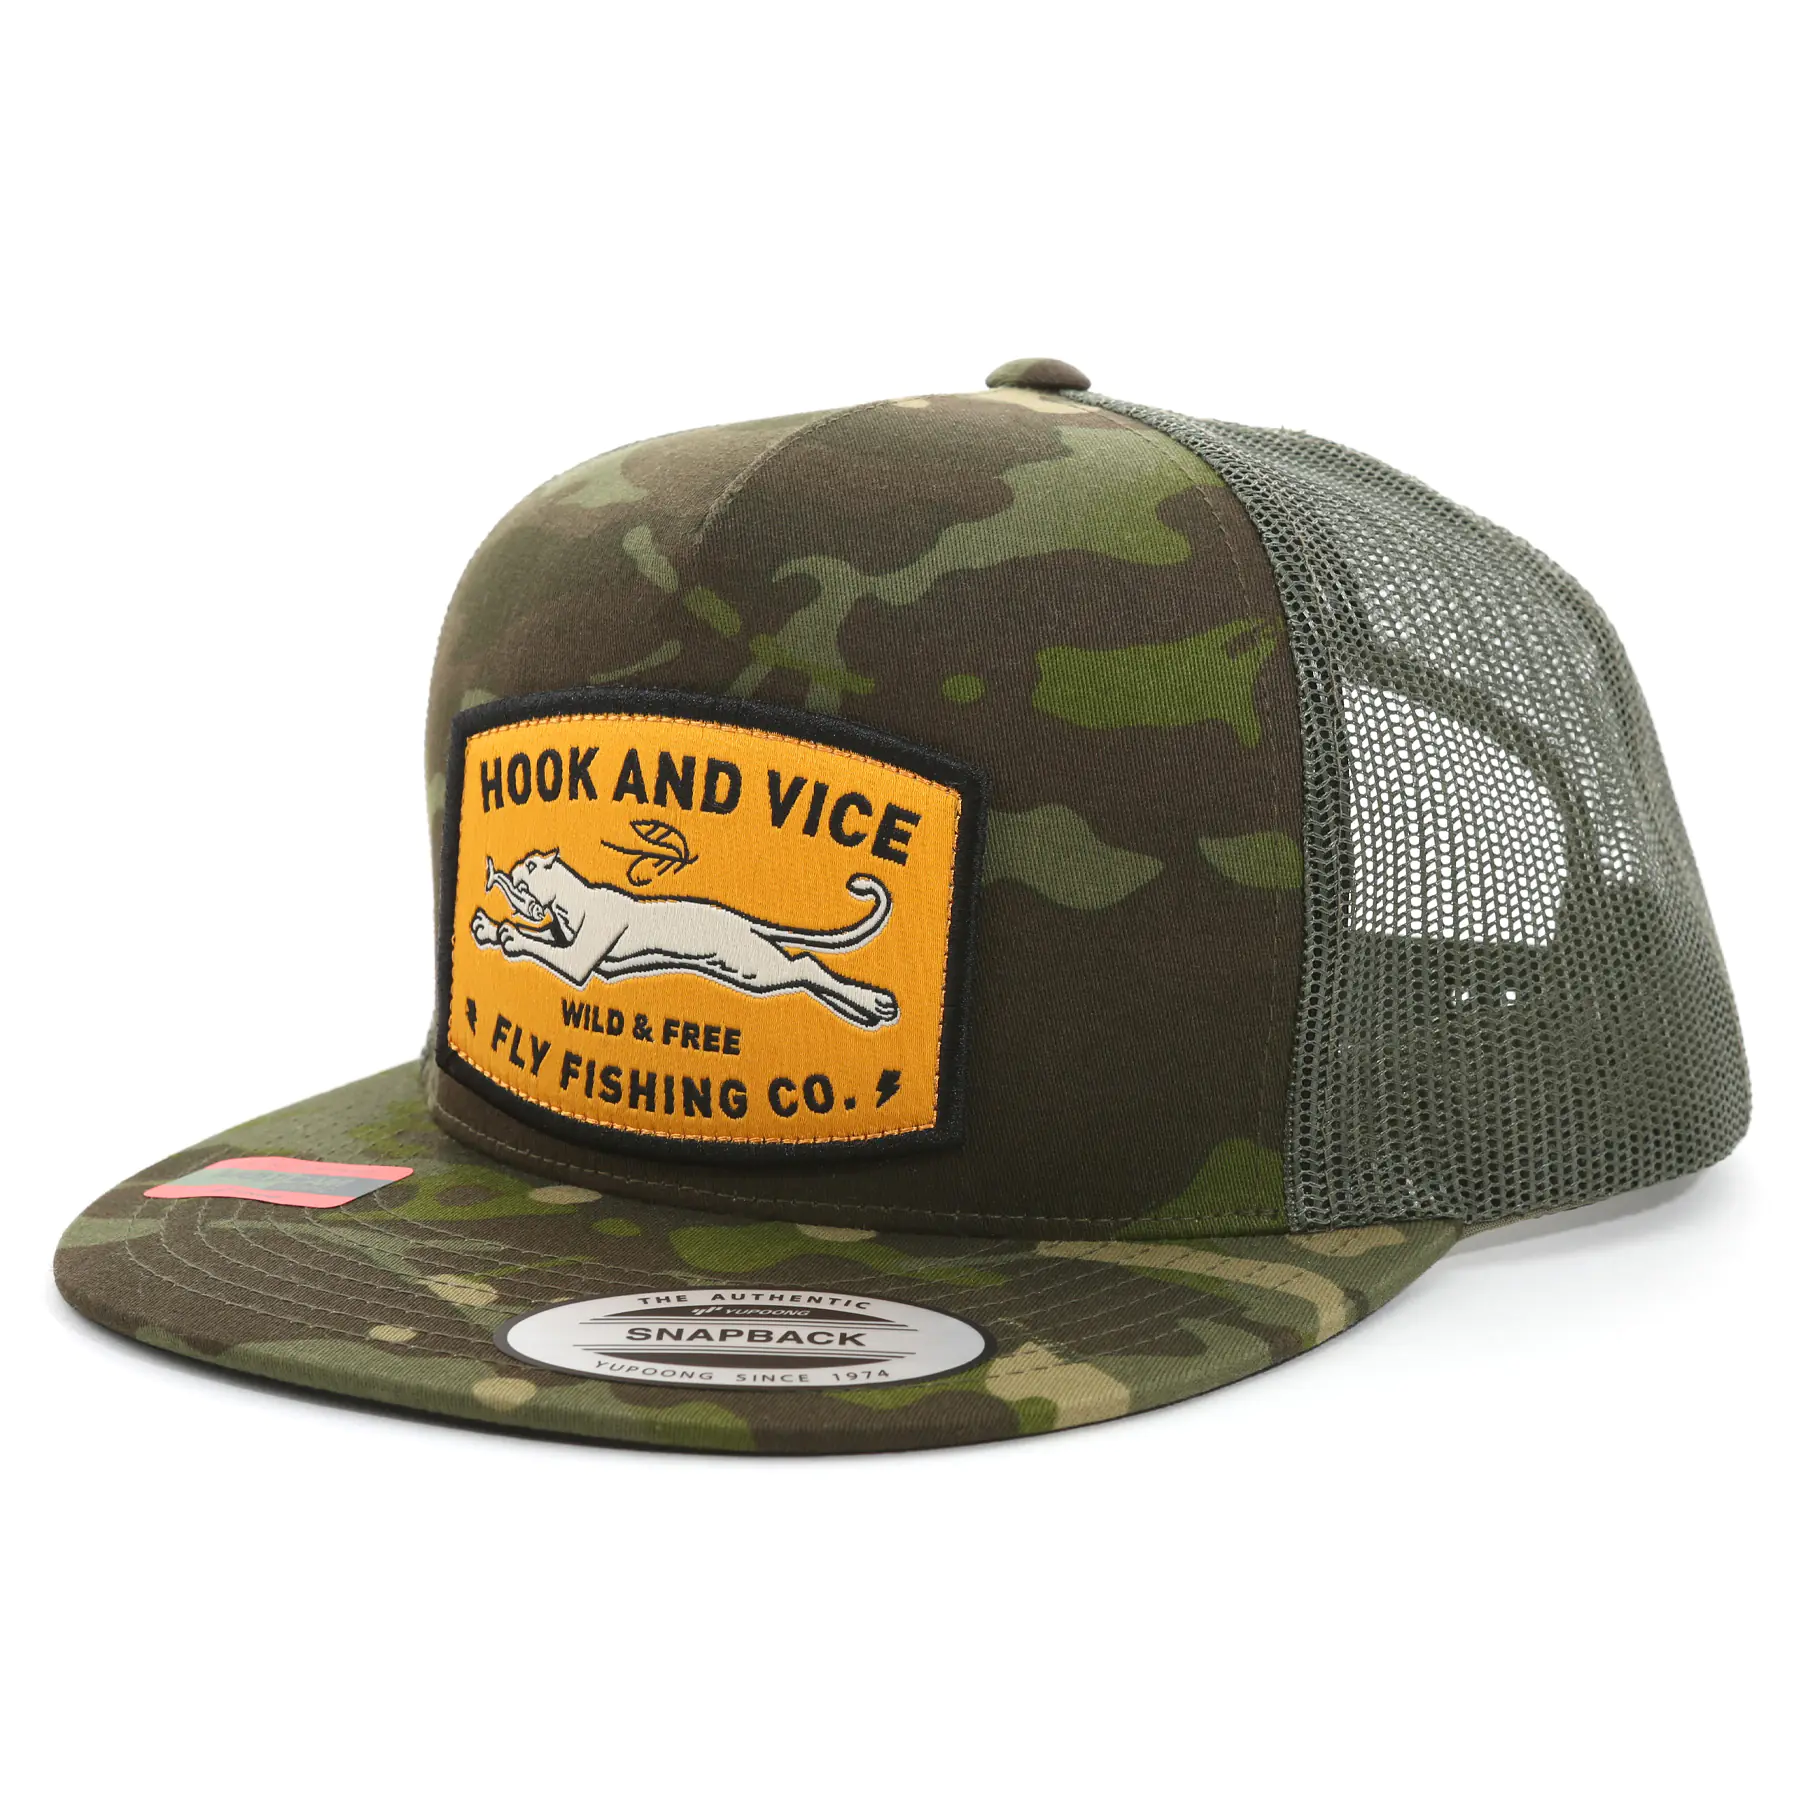 Hook and Vice Pro Model Hat - Cougar Camo